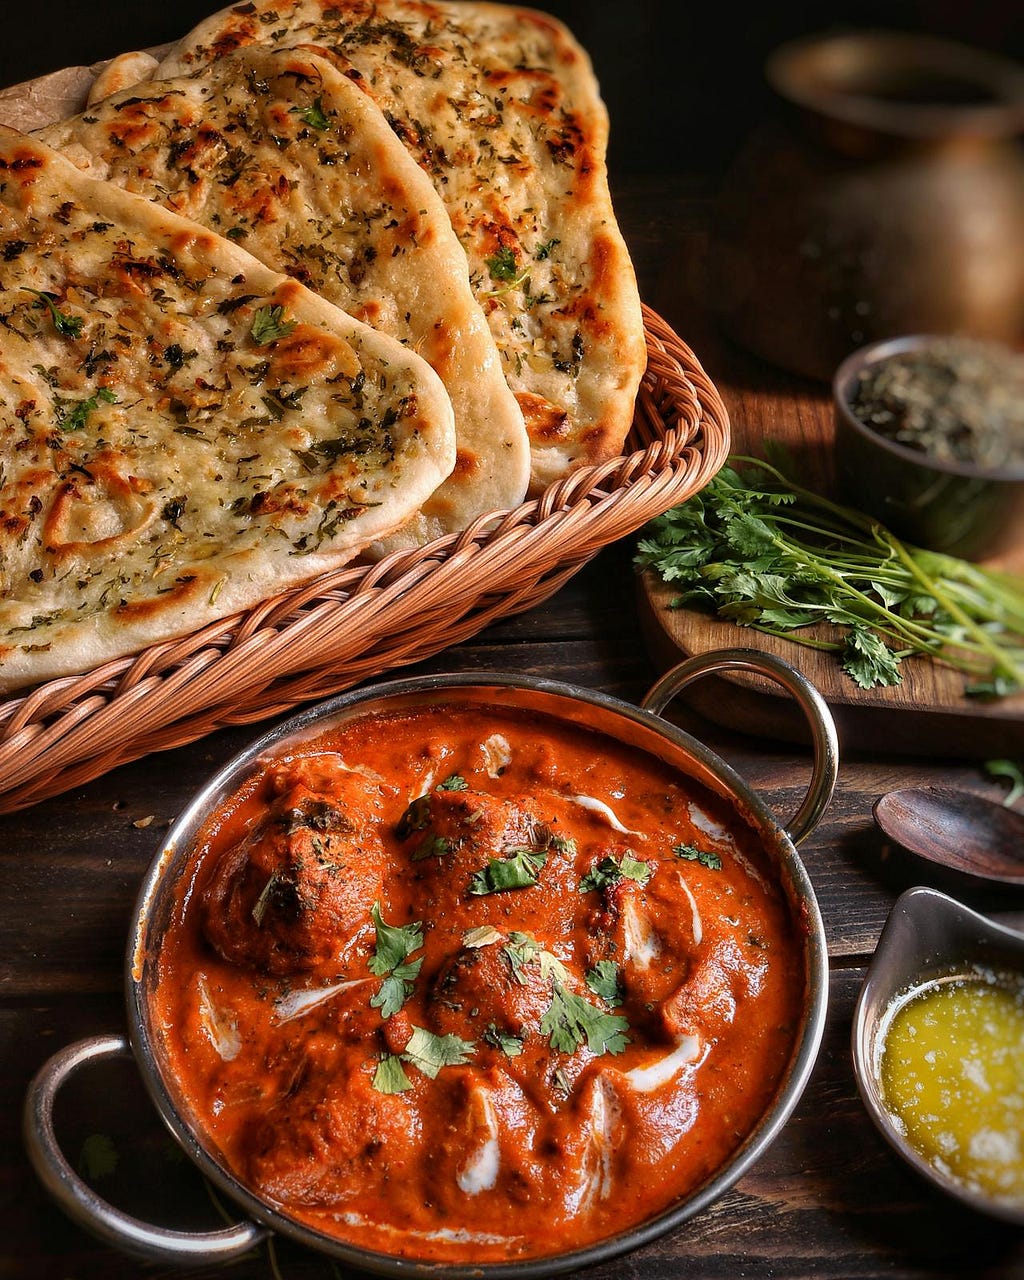 A serving of butter chicken with garlic naan on the side.